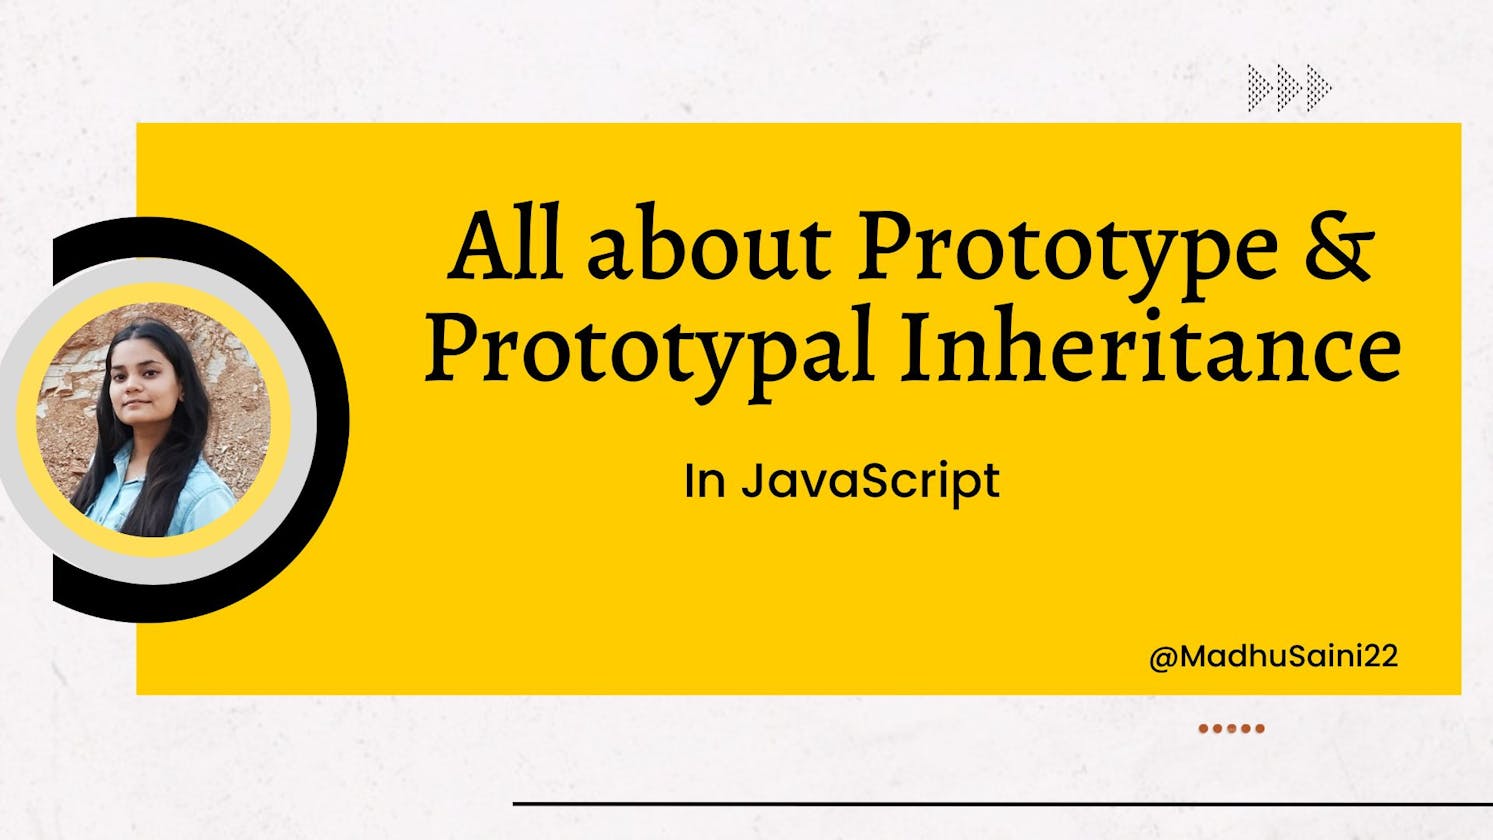 What's Prototype and Prototypal Inheritance in JavaScript?